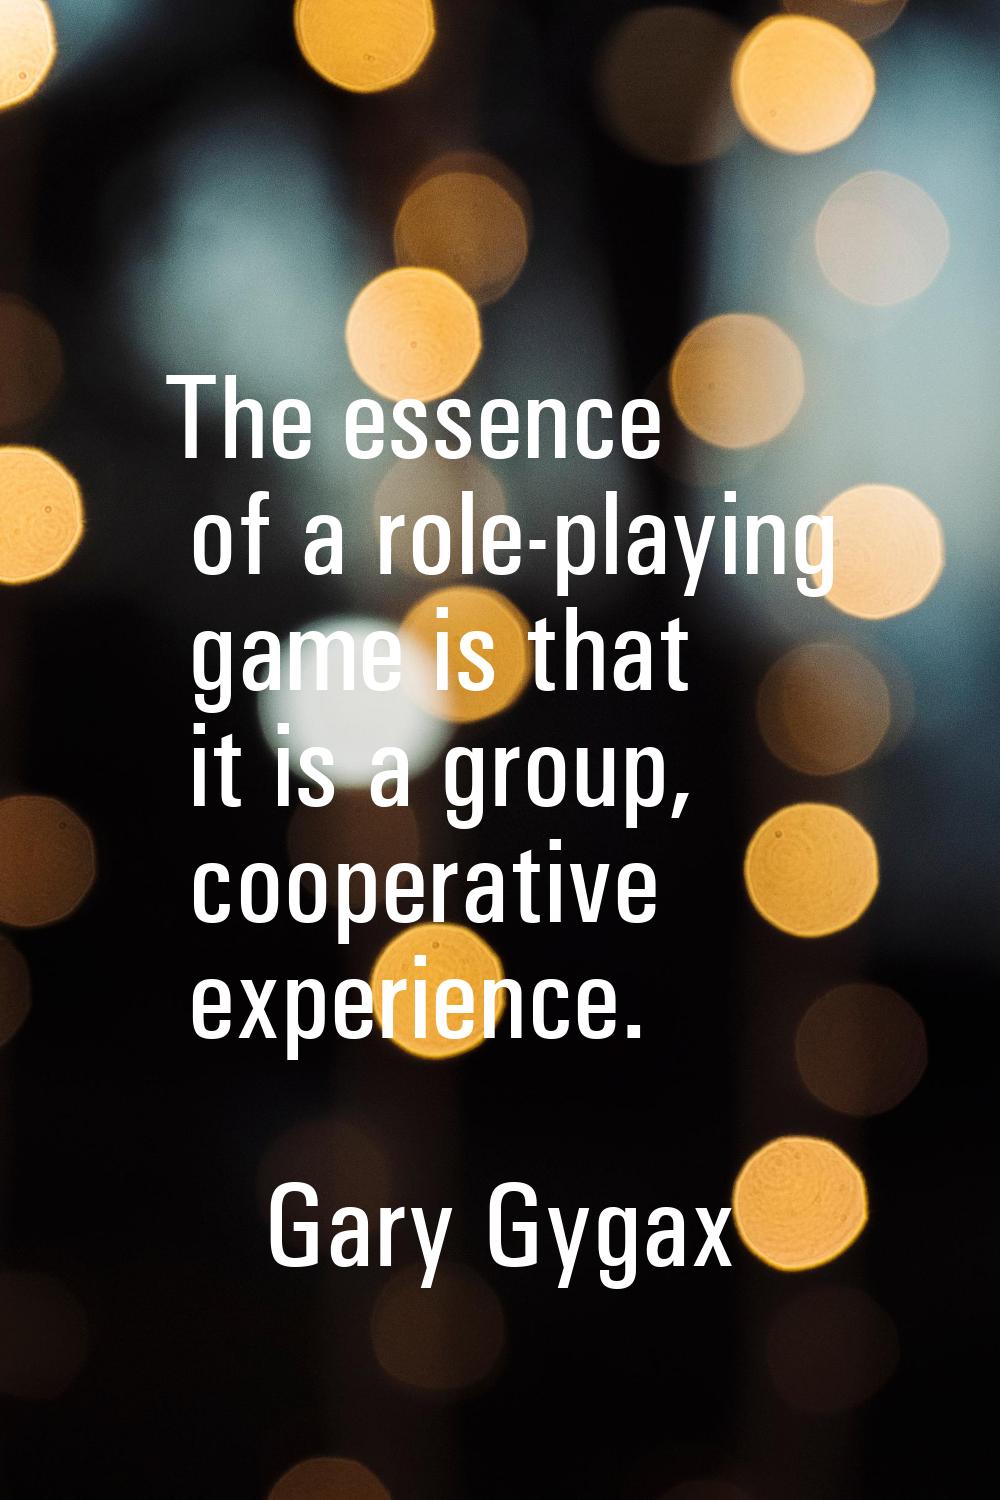 The essence of a role-playing game is that it is a group, cooperative experience.